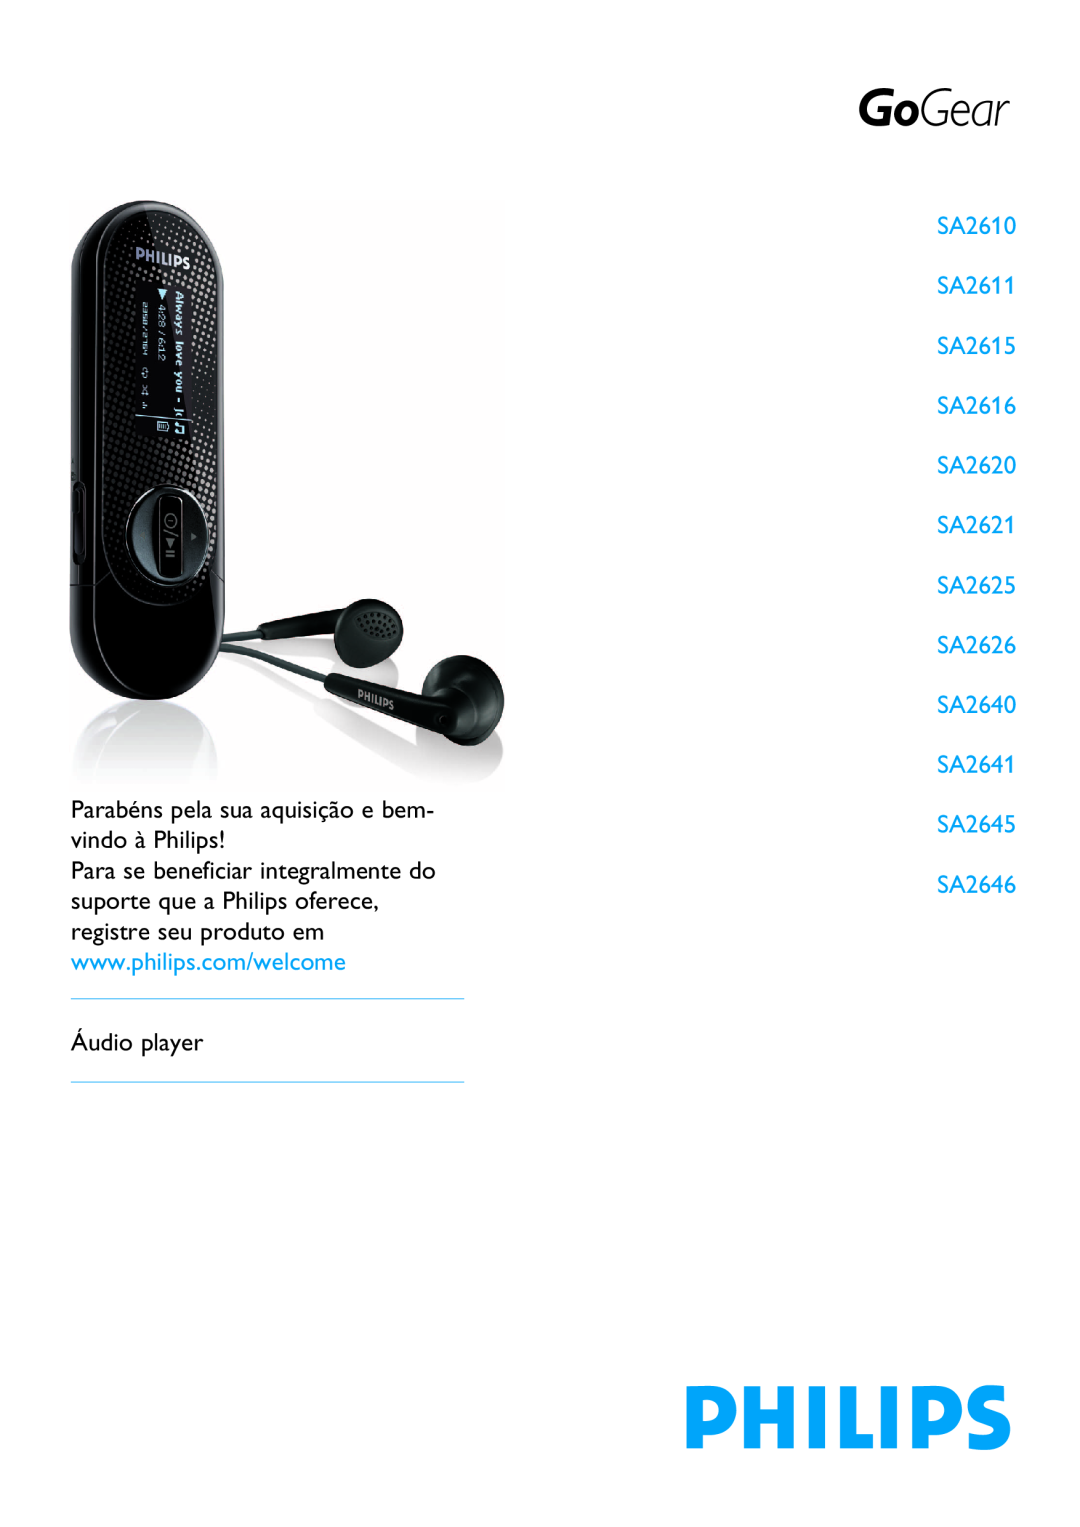 Philips SA2641, SA2646 quick start Philips GoGear audio player, Quick start guide, Install 2 Connect 3 Transfer 4 Enjoy 